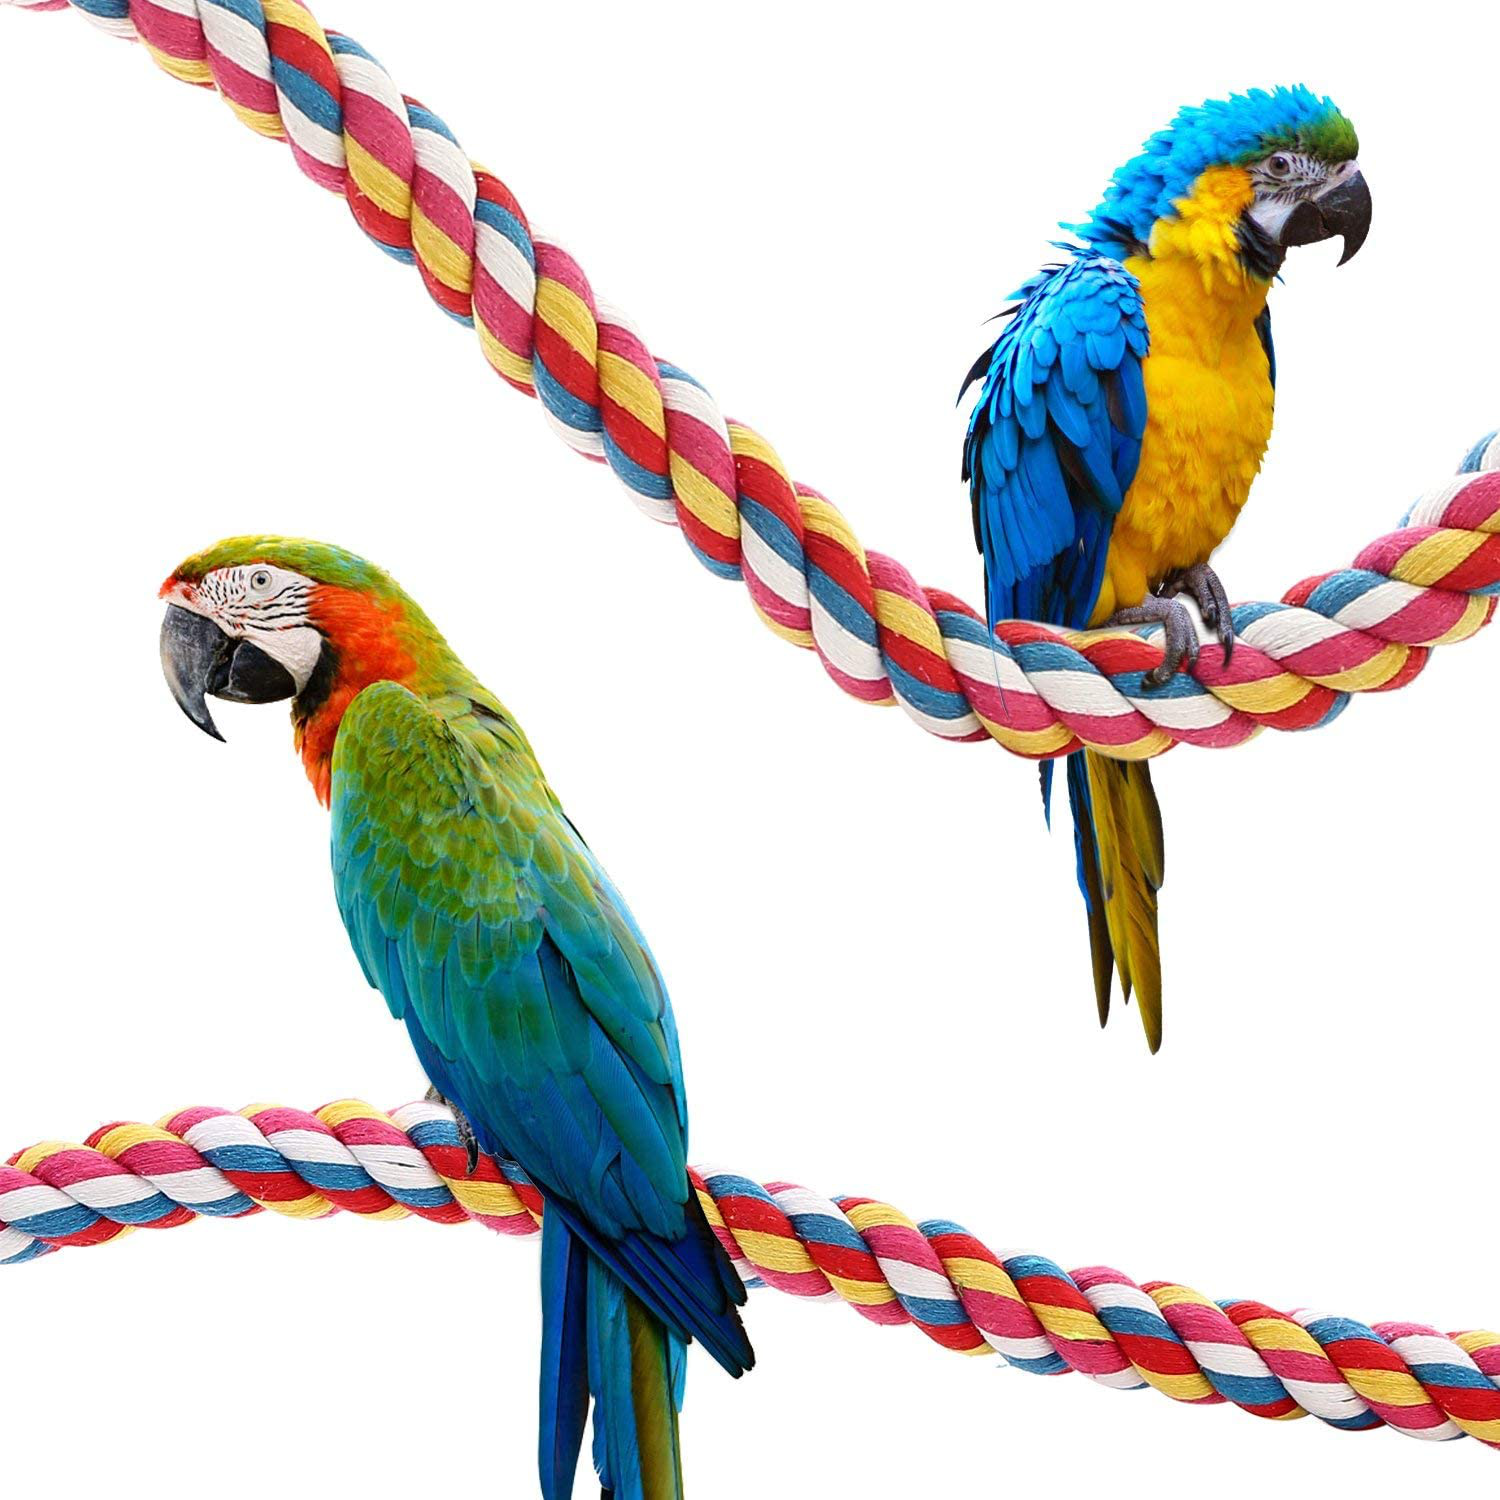 Jusney Bird Rope Perches, Comfy Perch Parrot Toys for Rope Bungee Bird Toy [1 Pack]